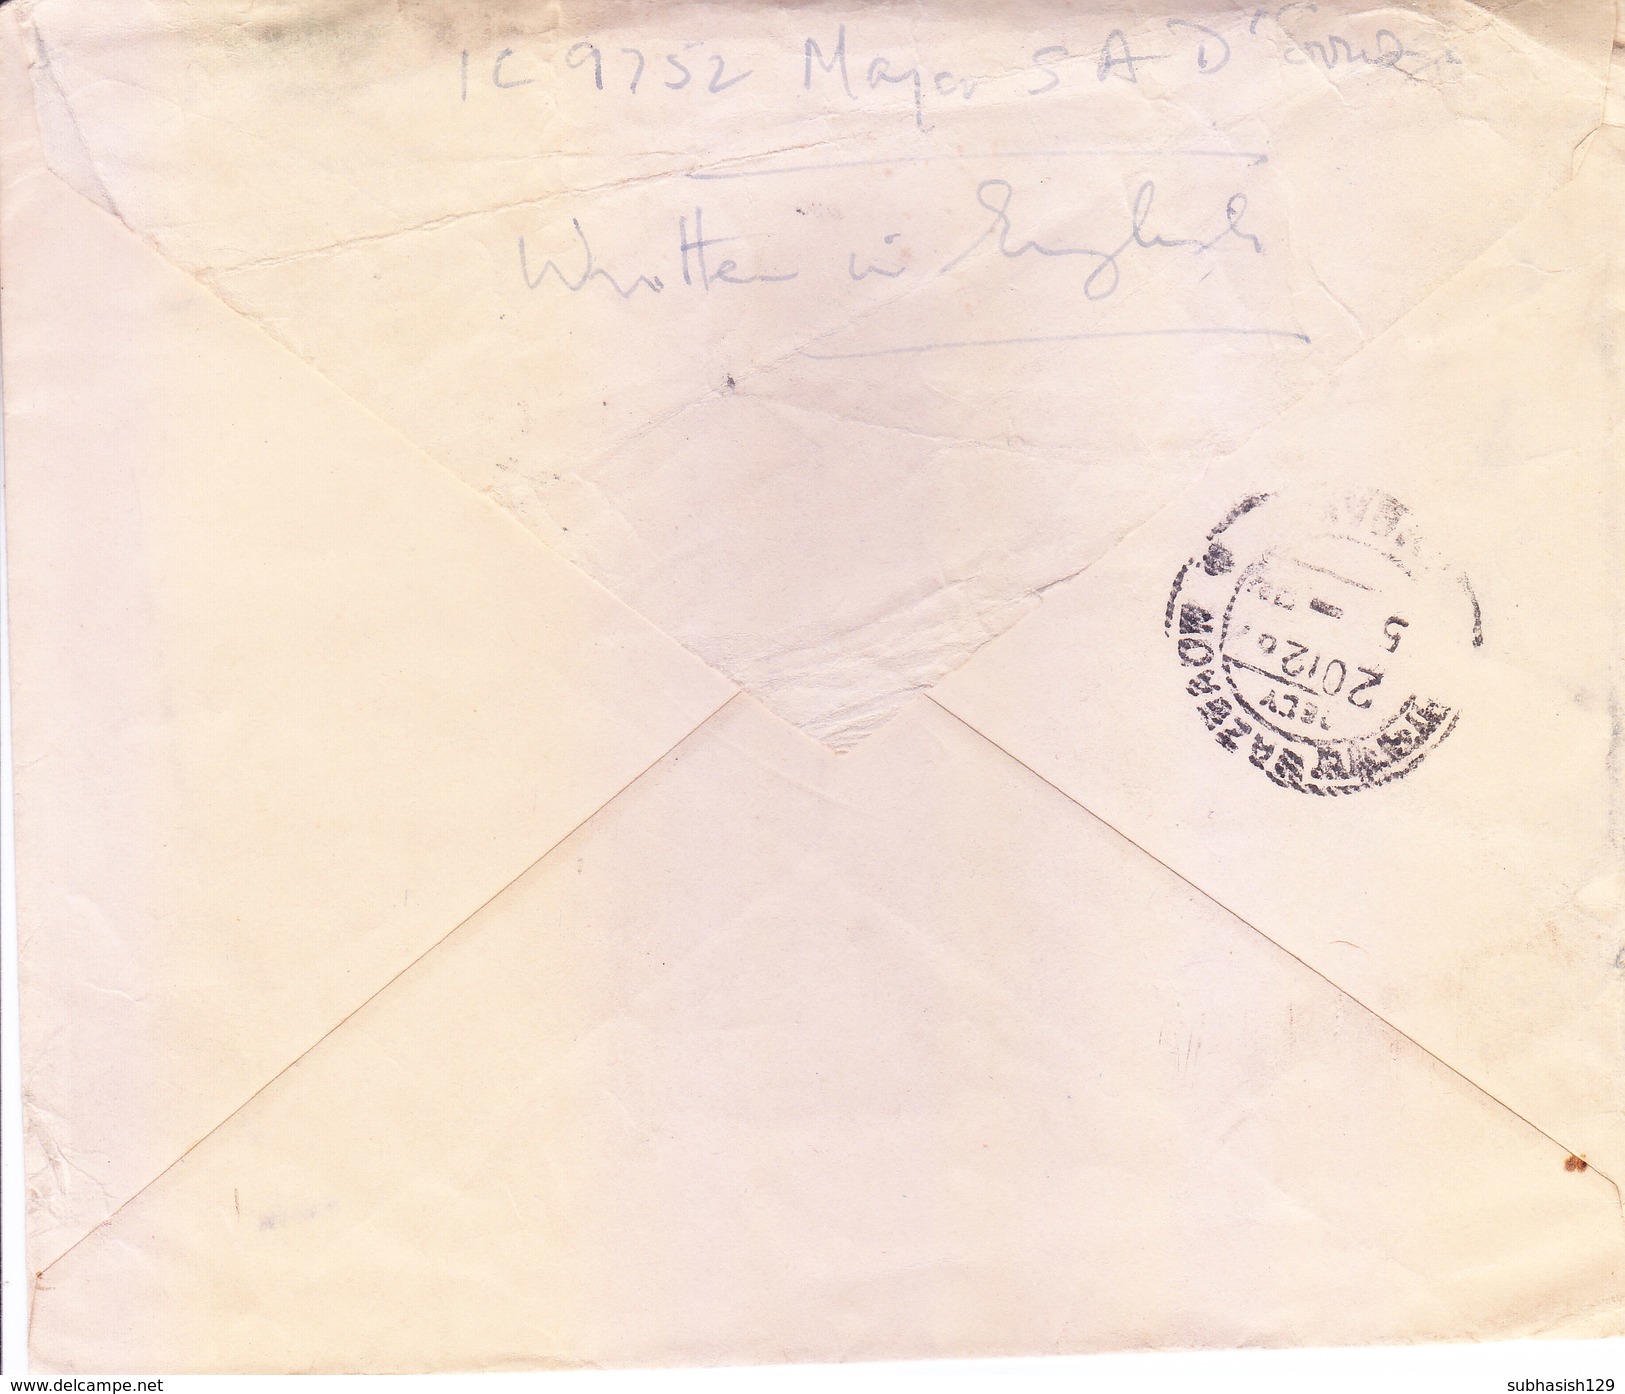 INDIA - 1962 - COMMERCIAL COVER POSTED FROM F.P.O. NO. 826 FOR BOMBAY WITH CENSOR MARKING - Covers & Documents